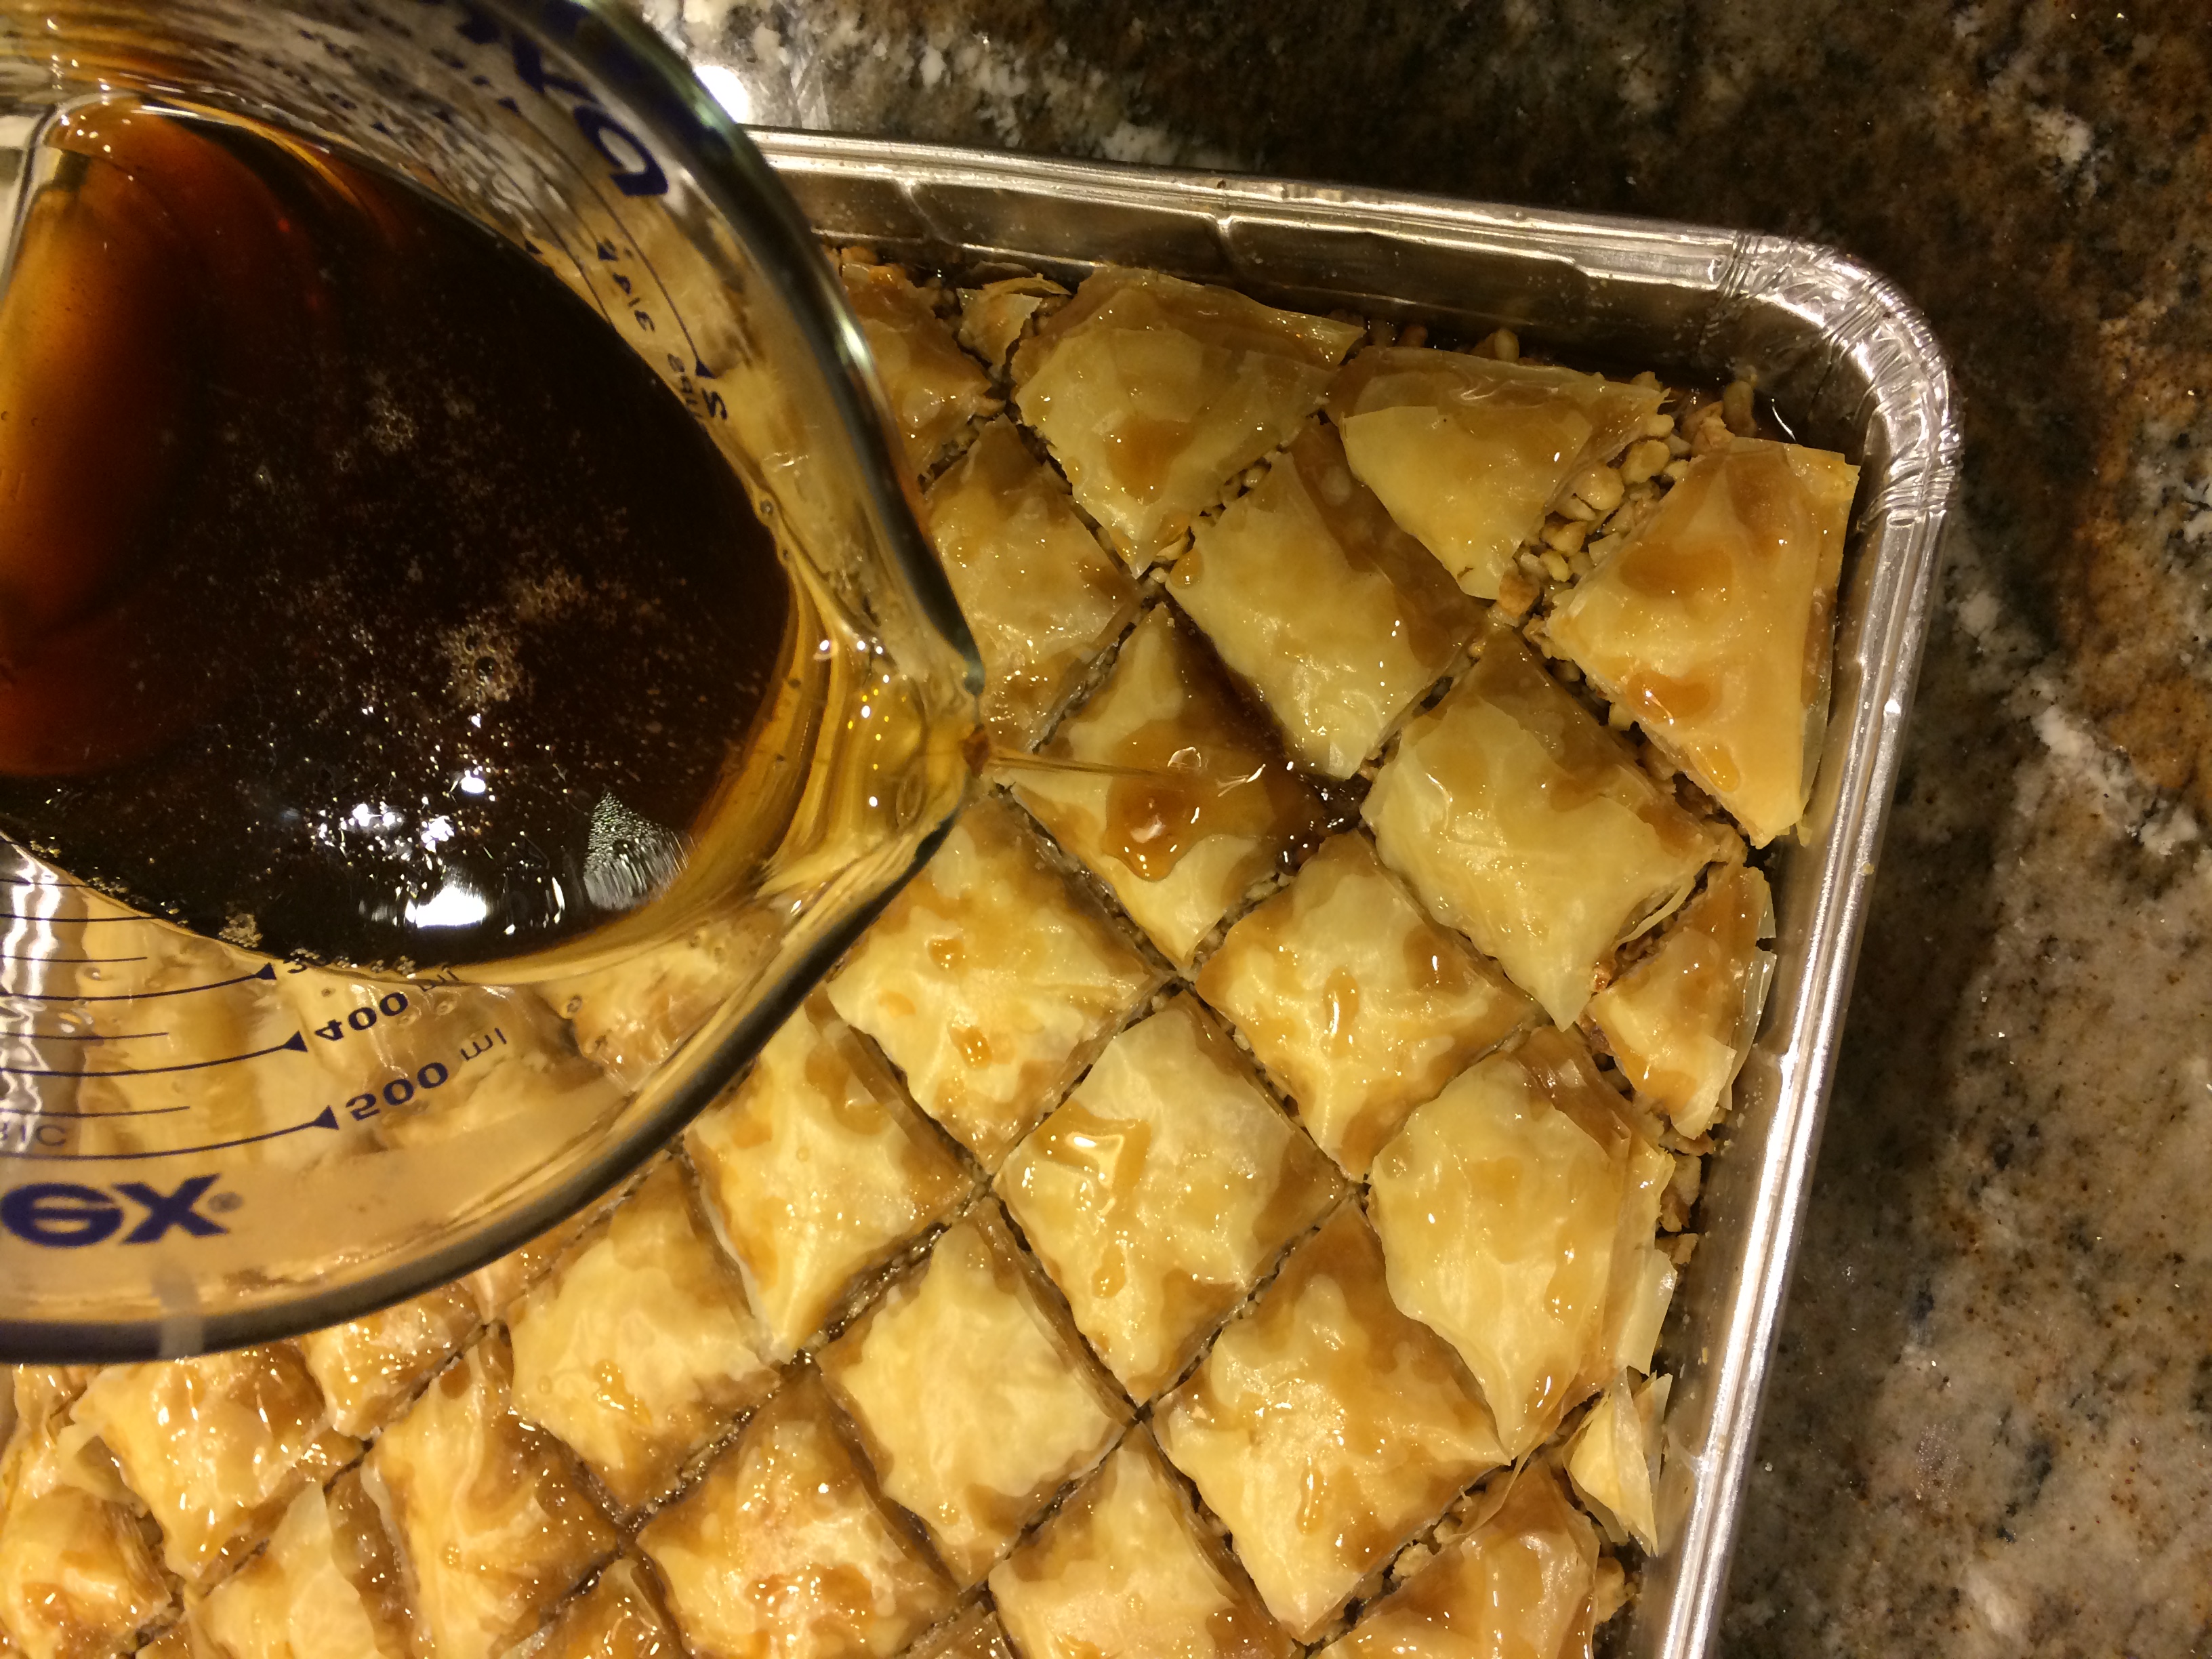 pouring simple syrup over the baked pistachio baklava